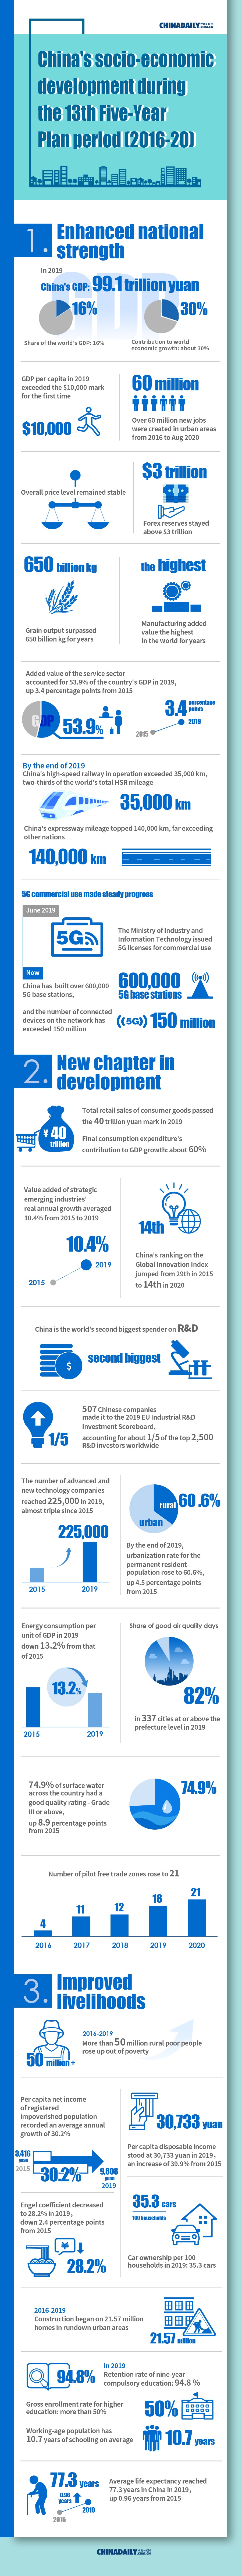 China's development from 2016-20 in numbers